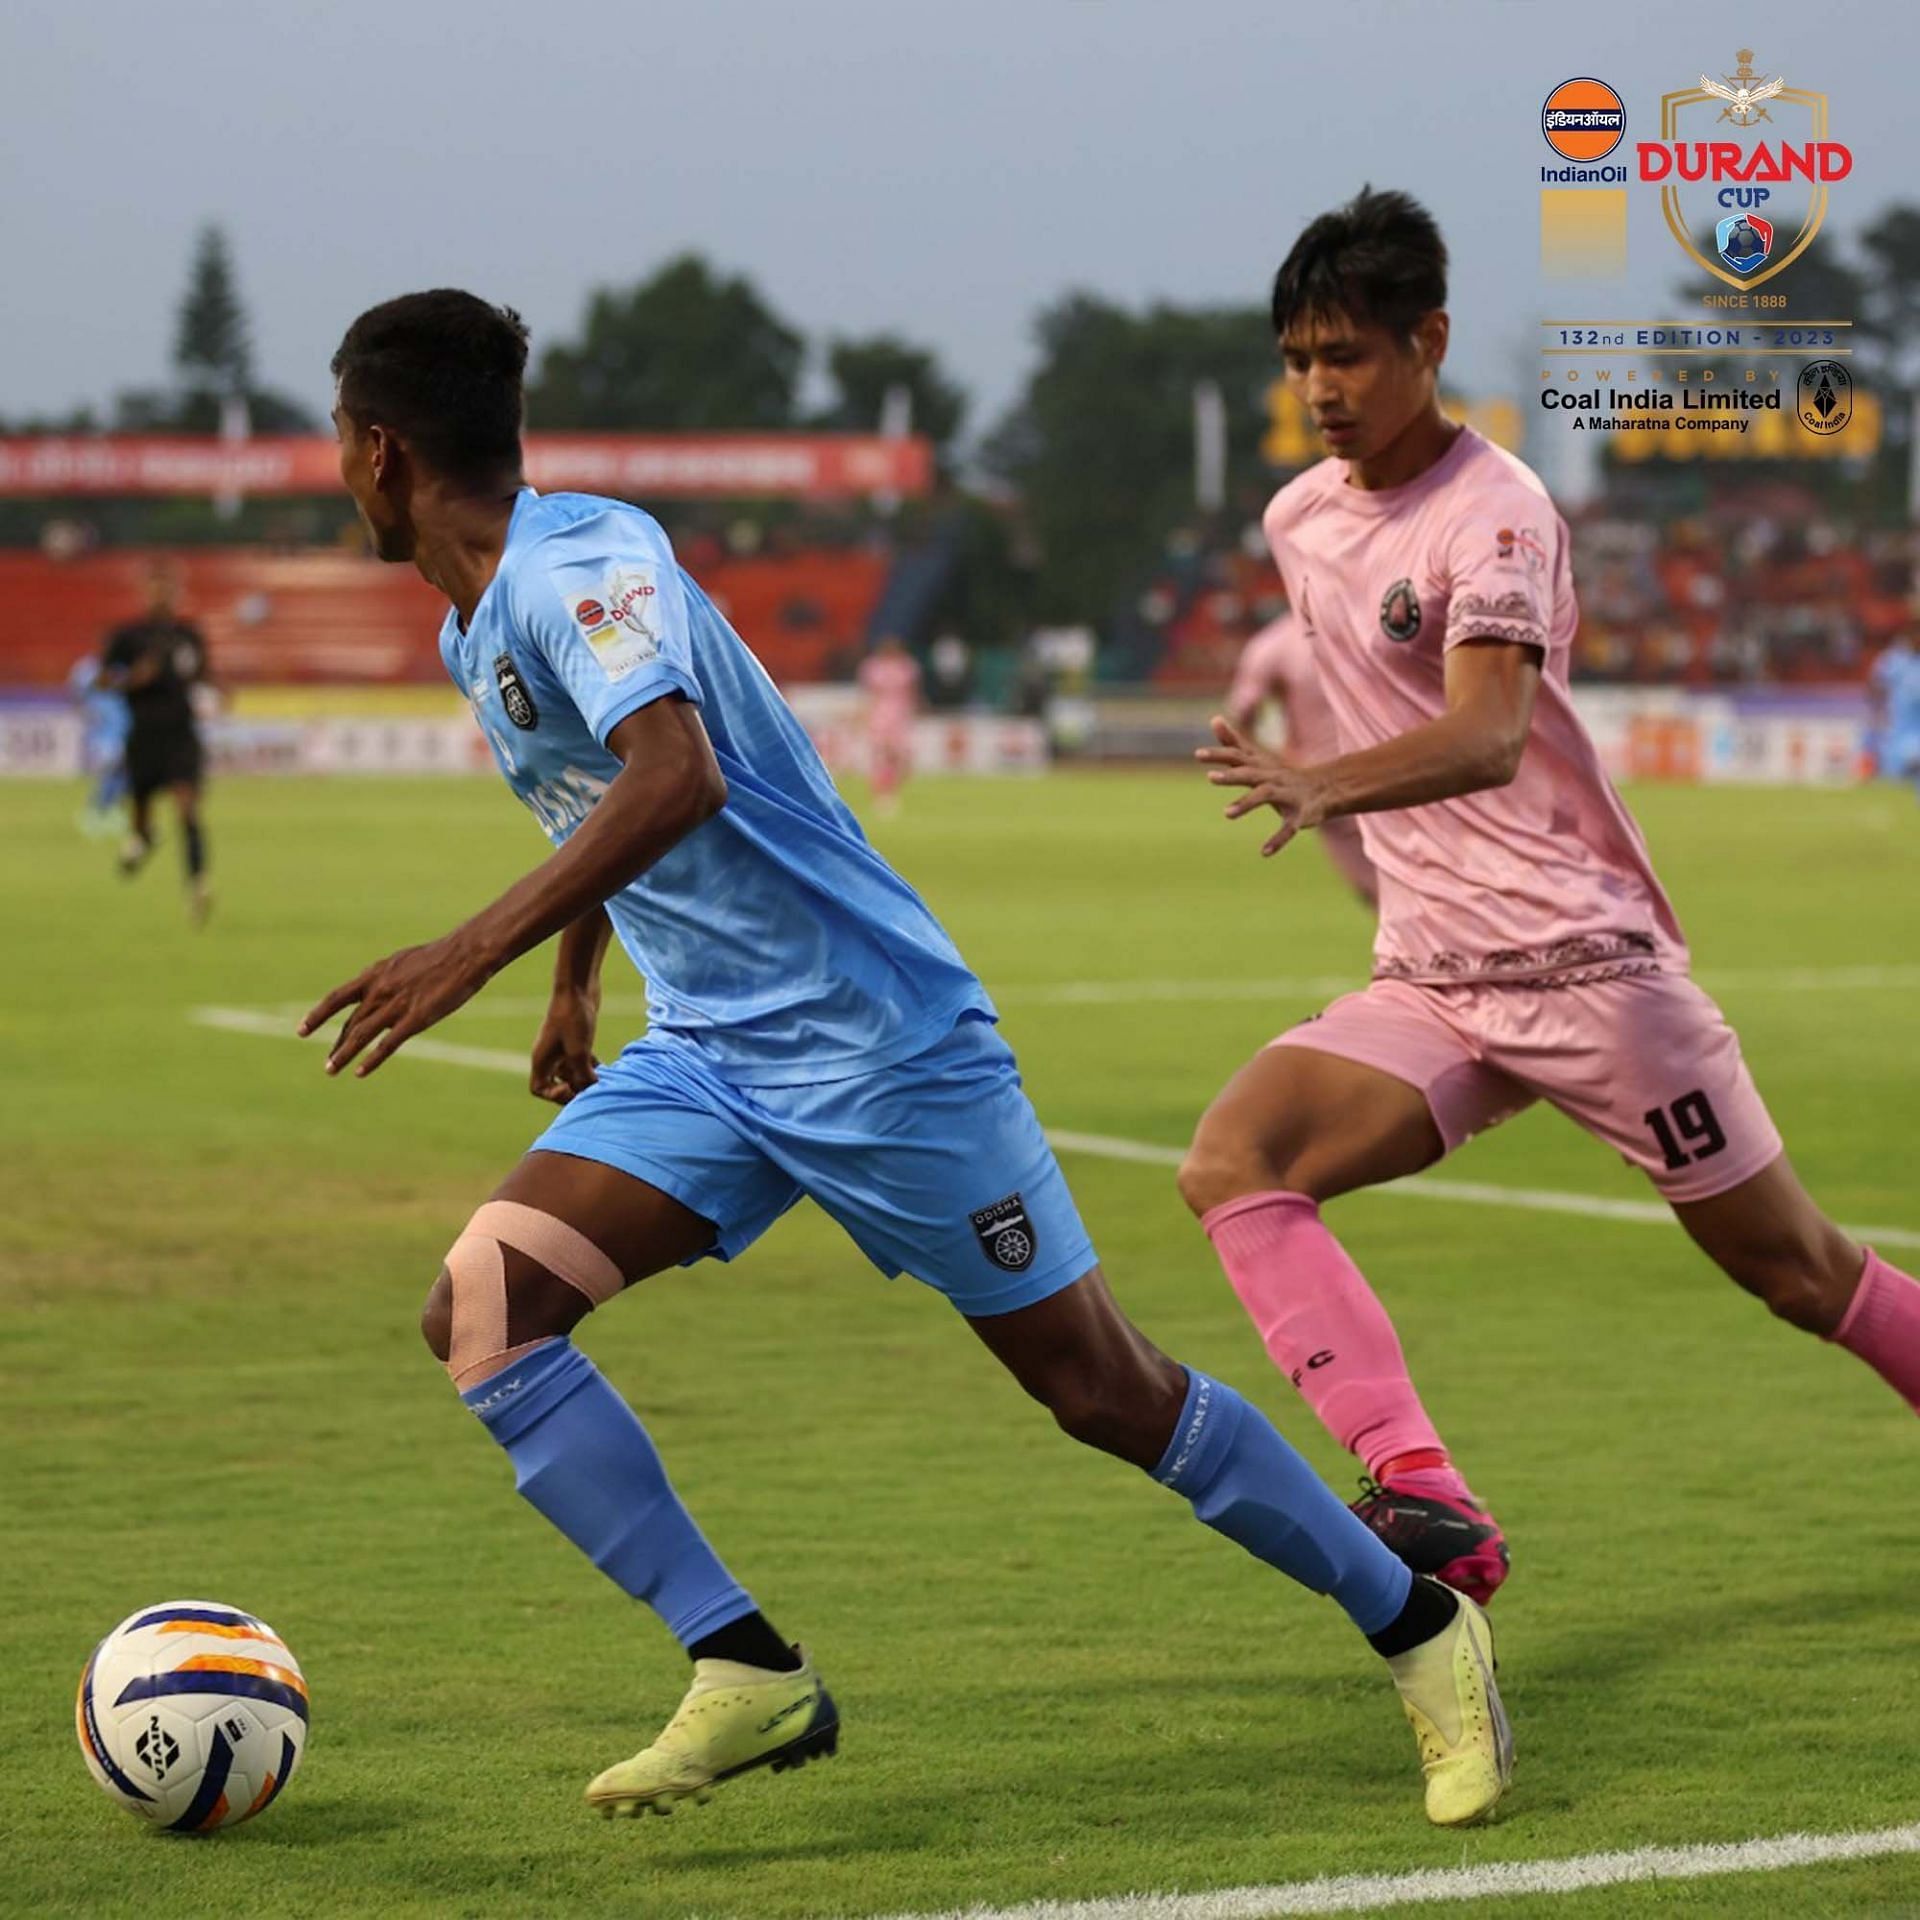 Odisha FC did very well against Rajasthan United today (Credits: Durand Cup media)